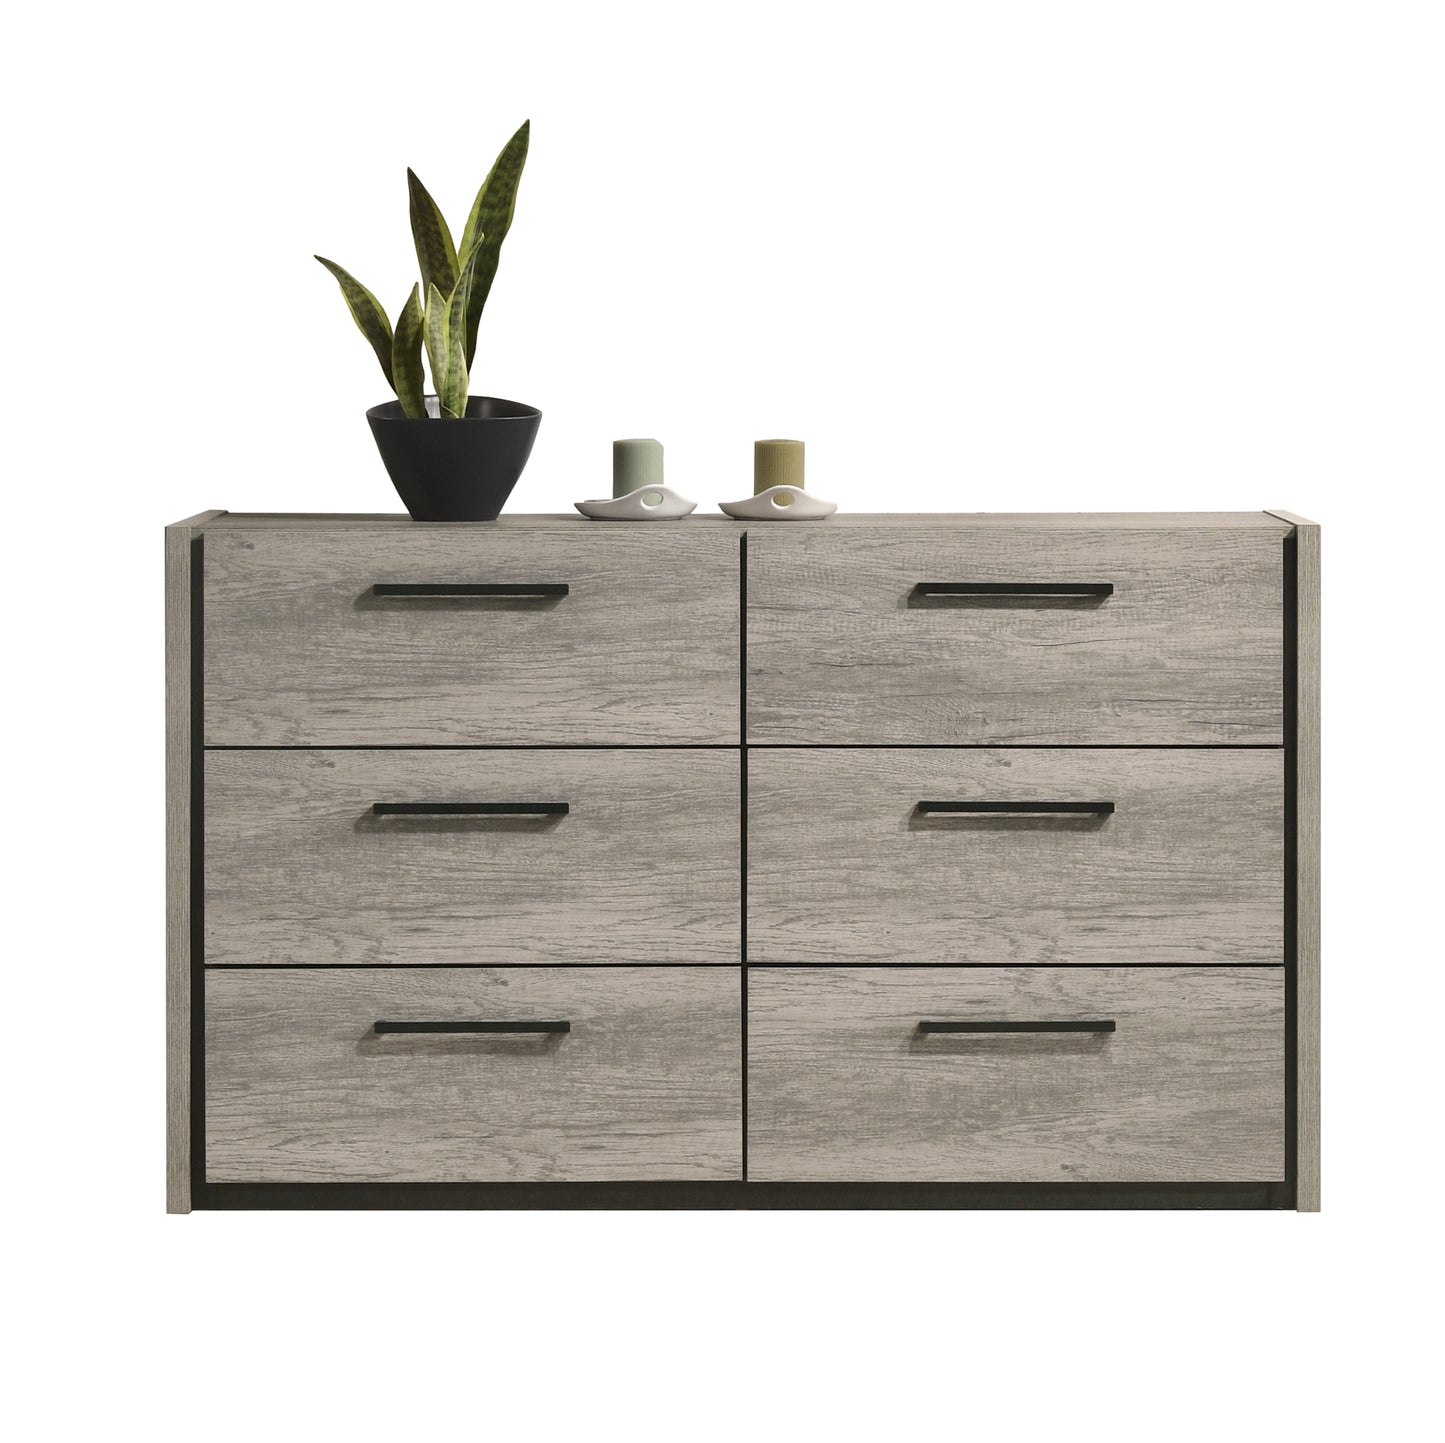 Roundhill Furniture Lenca 6-Drawer Dresser with Mirror - Weathered Gray